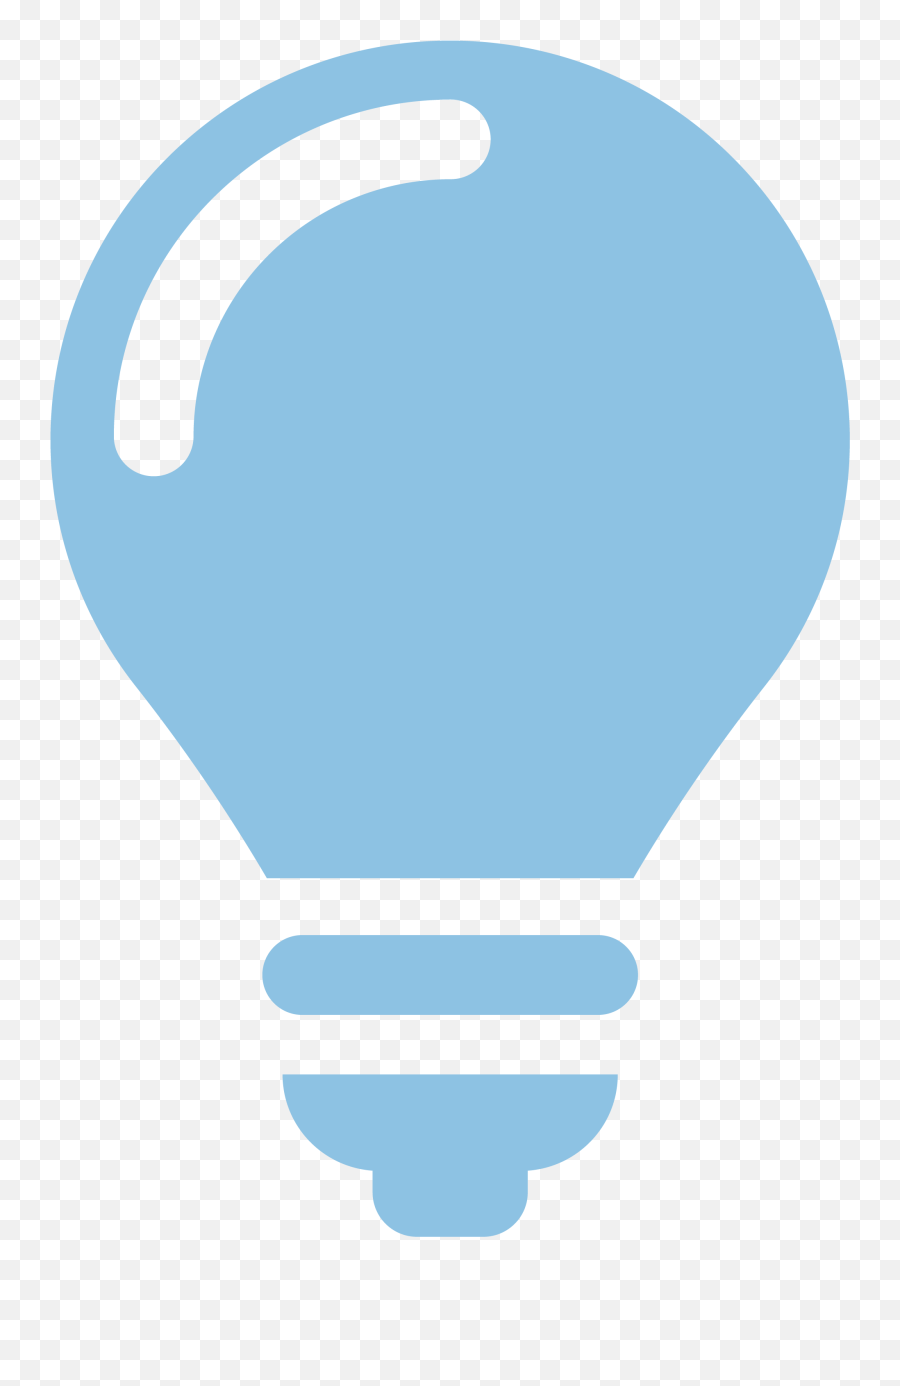 Is Metering Delivering The Future Of Utility Management - Incandescent Light Bulb Png,Electricity Meter Icon